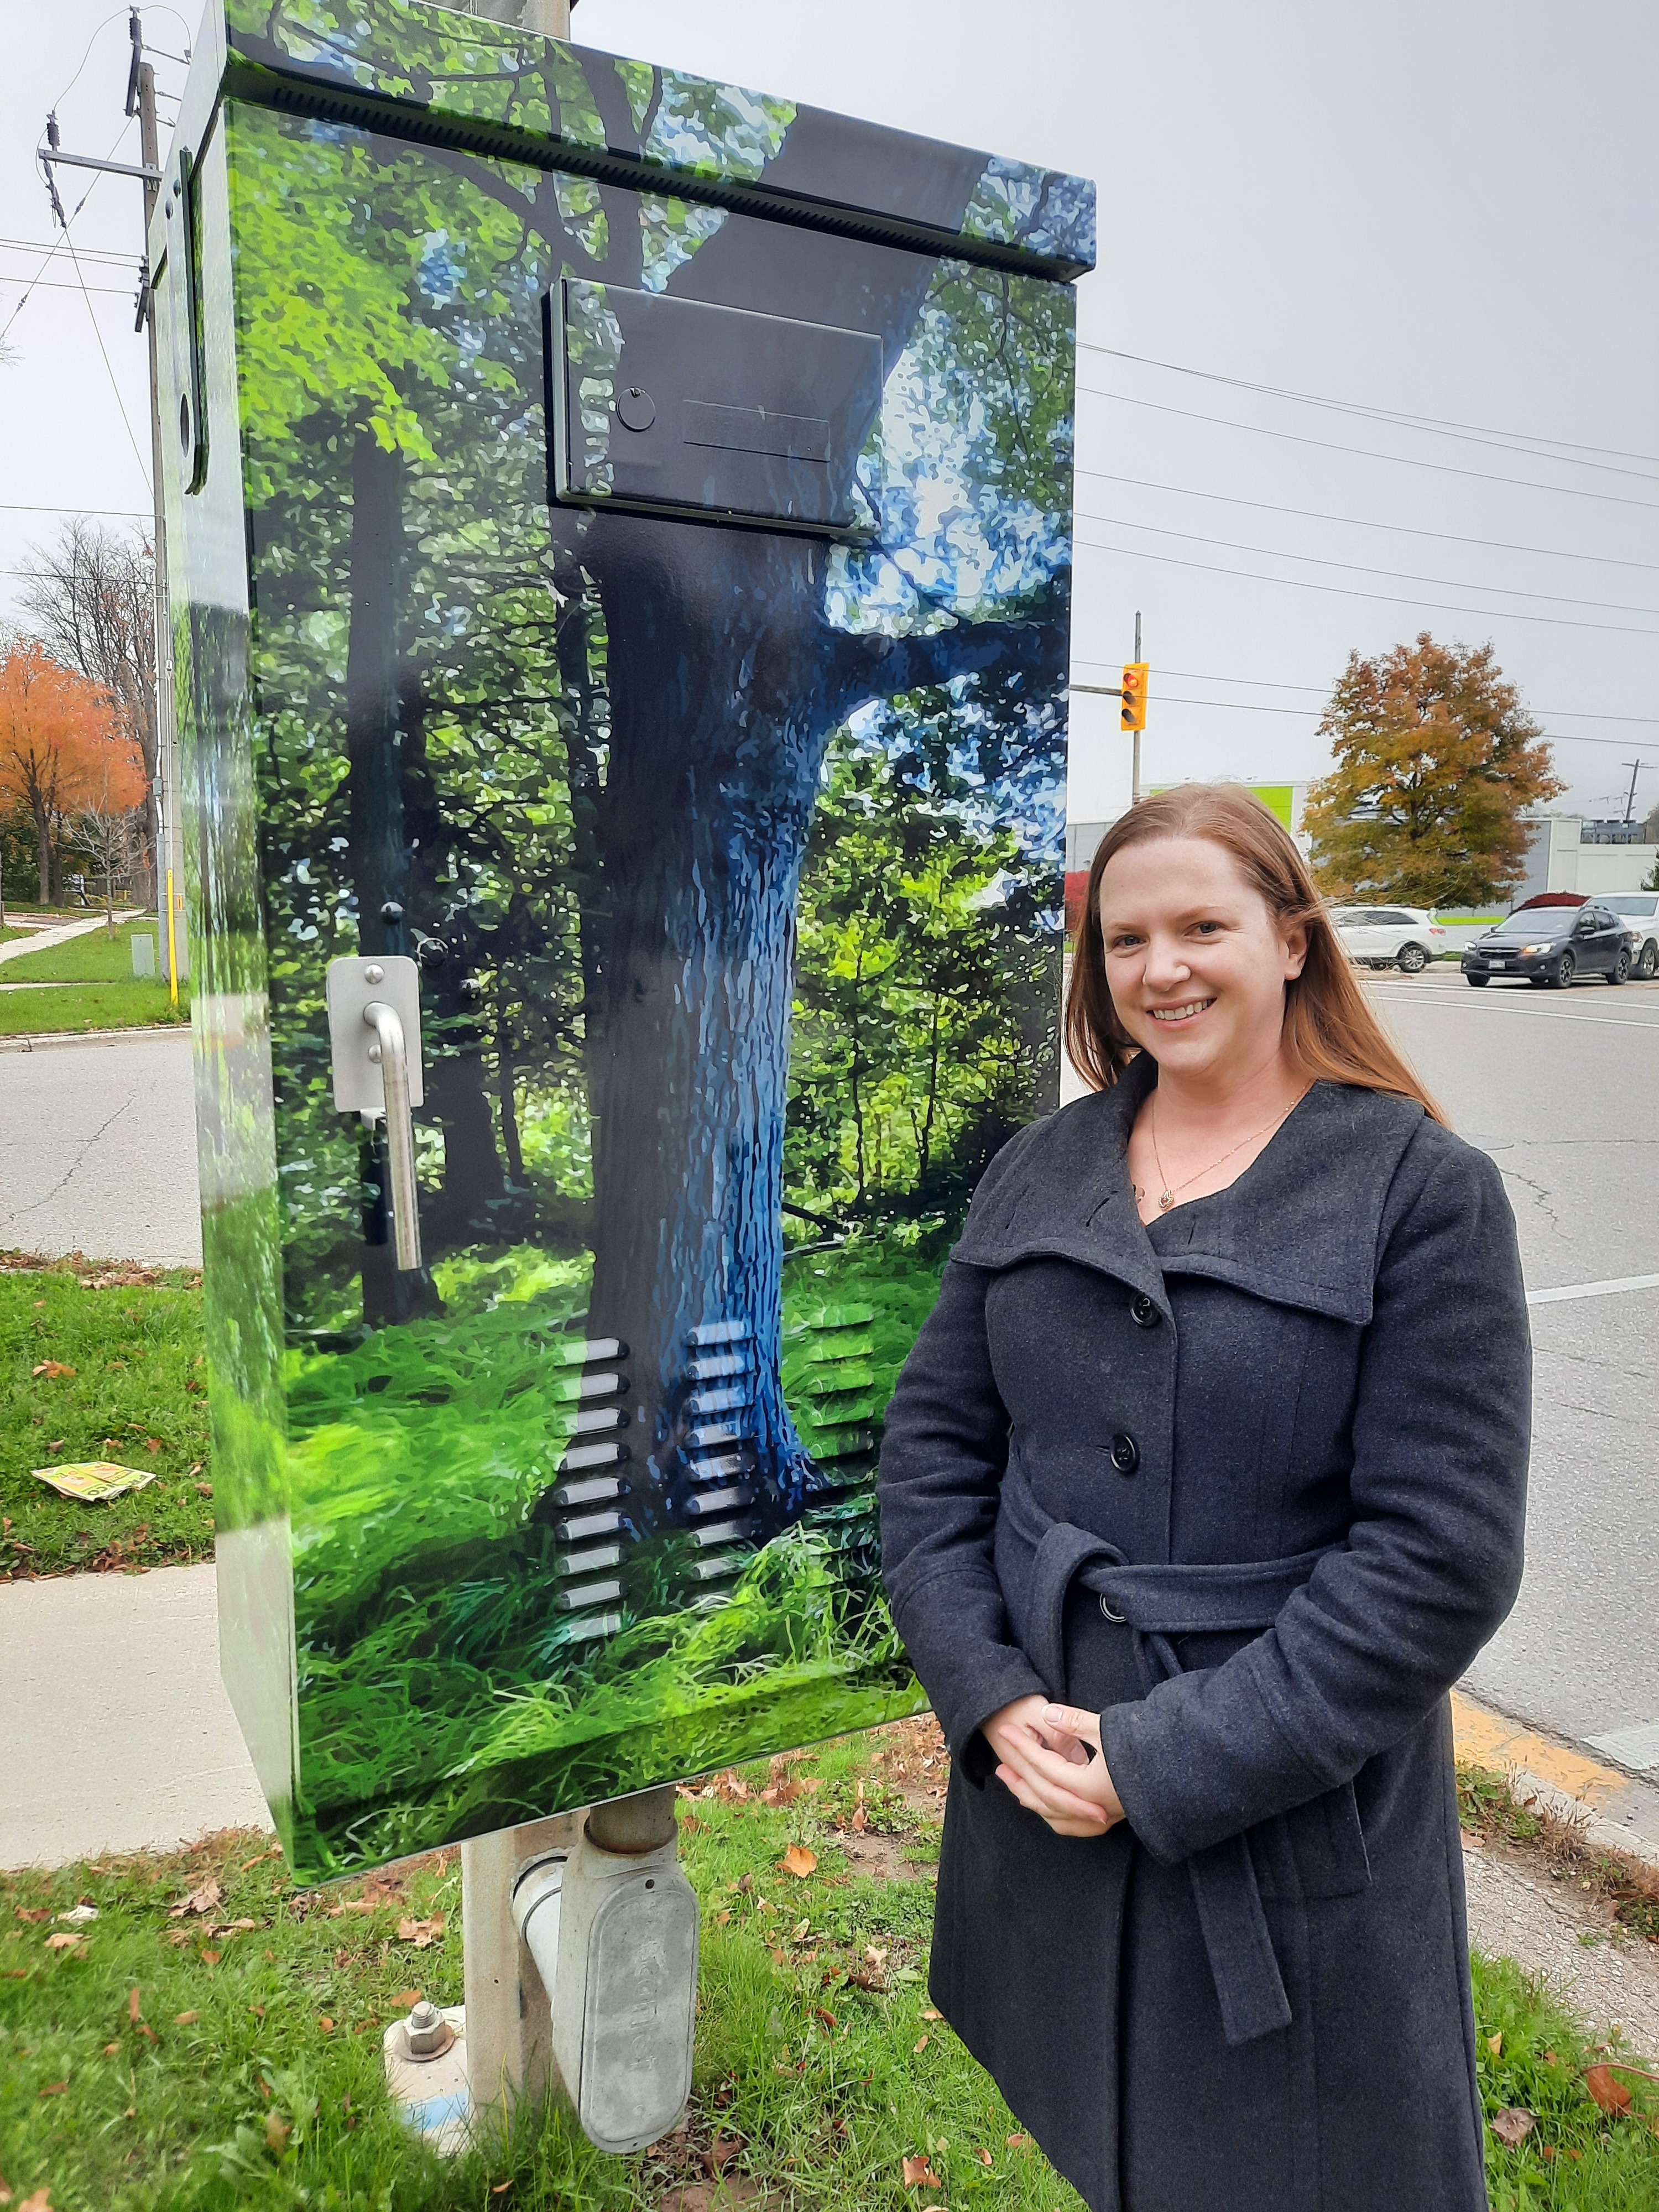 Artist standing next to utility box with art installation